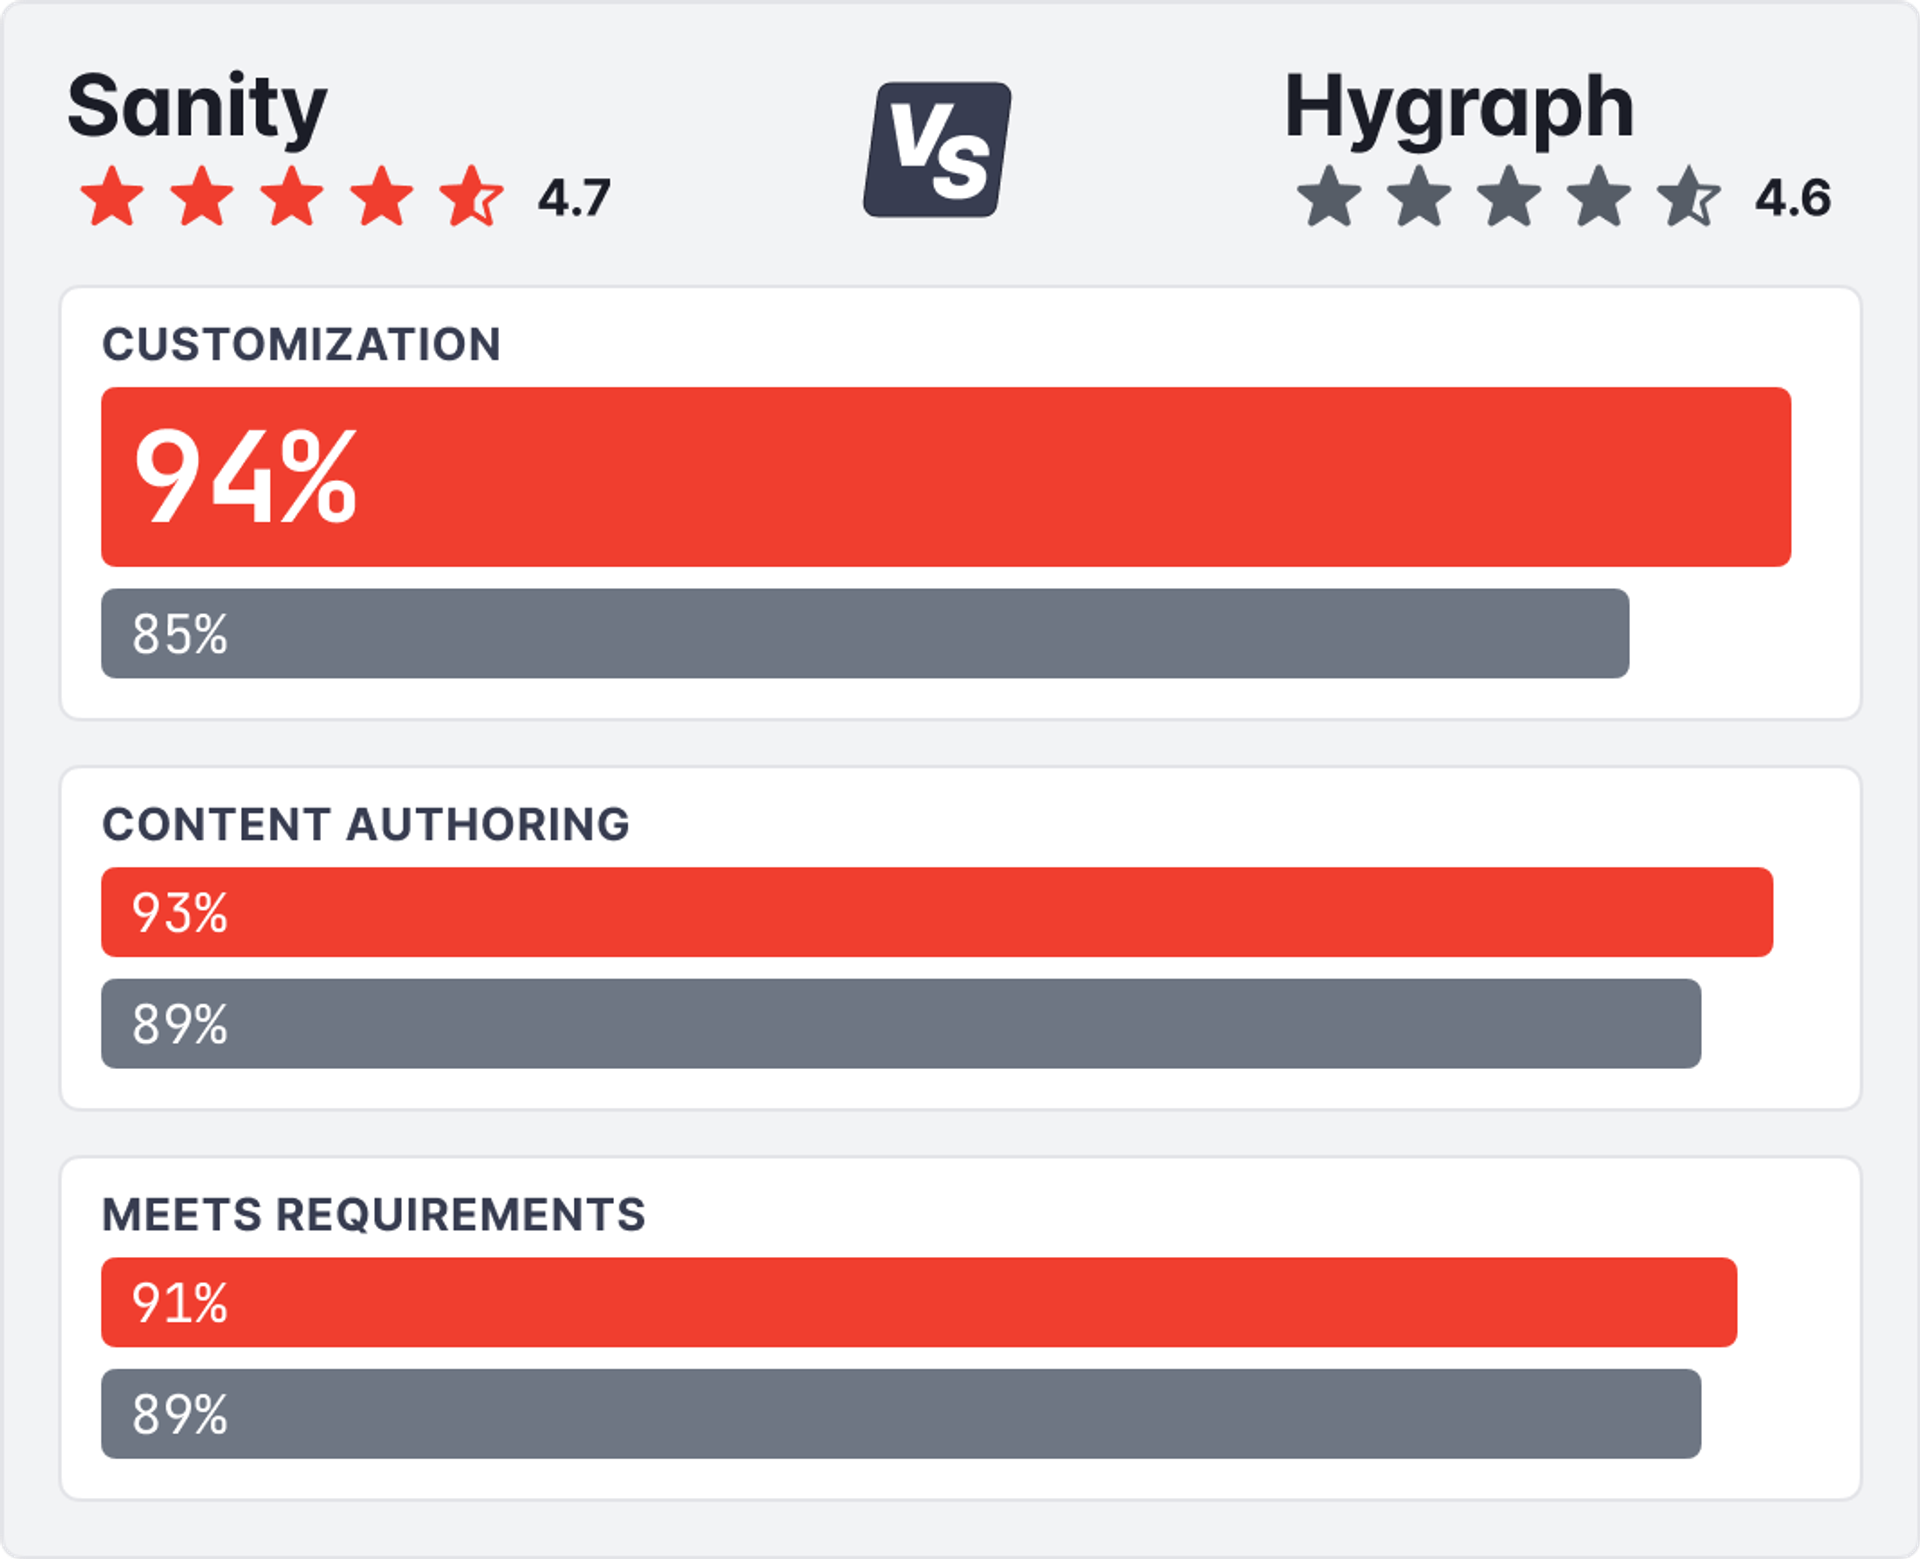 a comparison of sanity and hygraph shows the percentage of customization and content authoring satisfaction